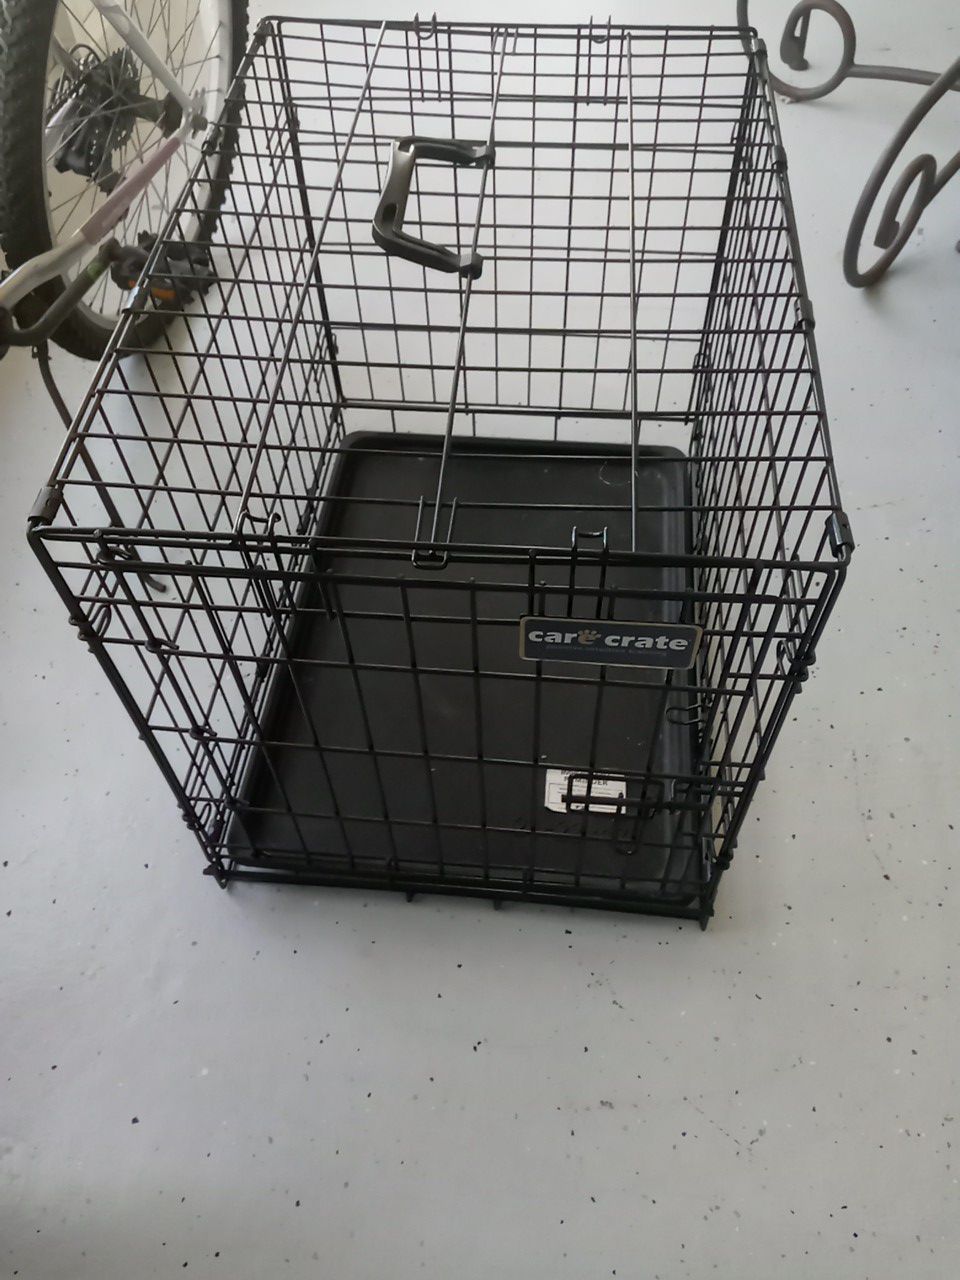 Car crate small pet cage